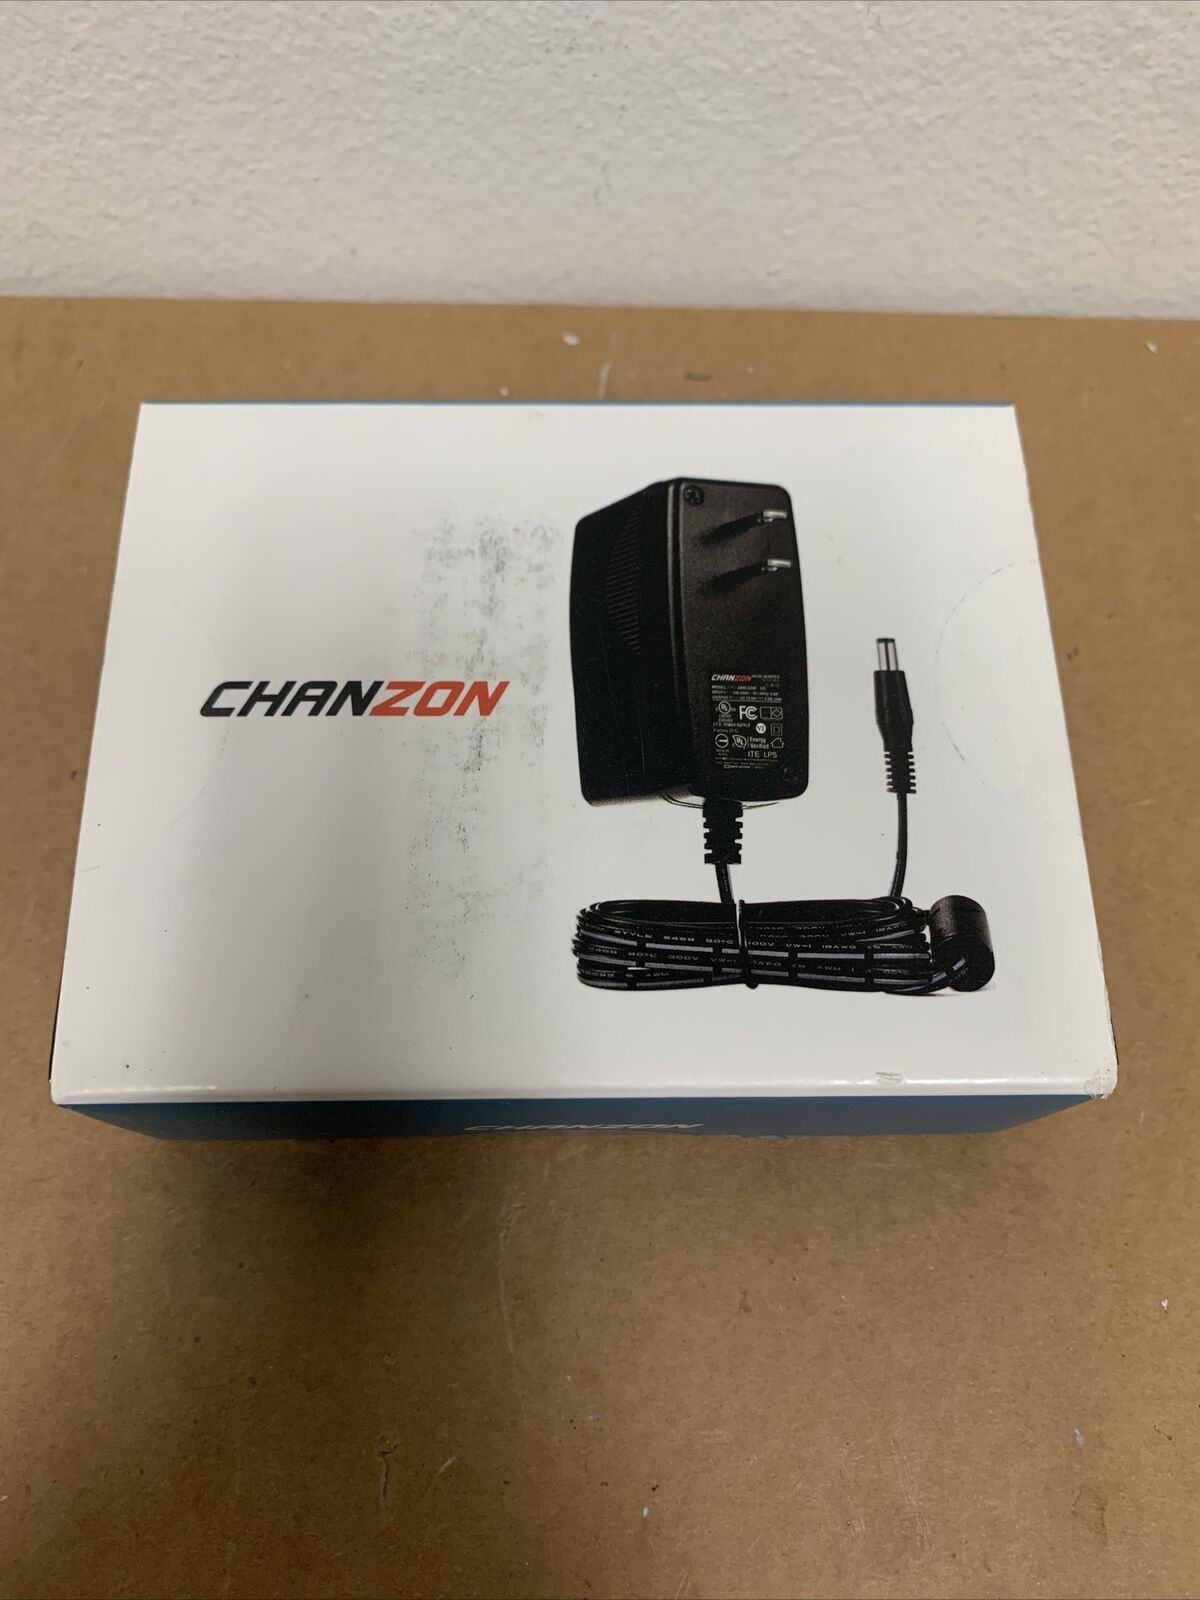 Chanzon 12V 2A 24W Class 2 Power Supply AC DC Switching Adapter - New/Sealed